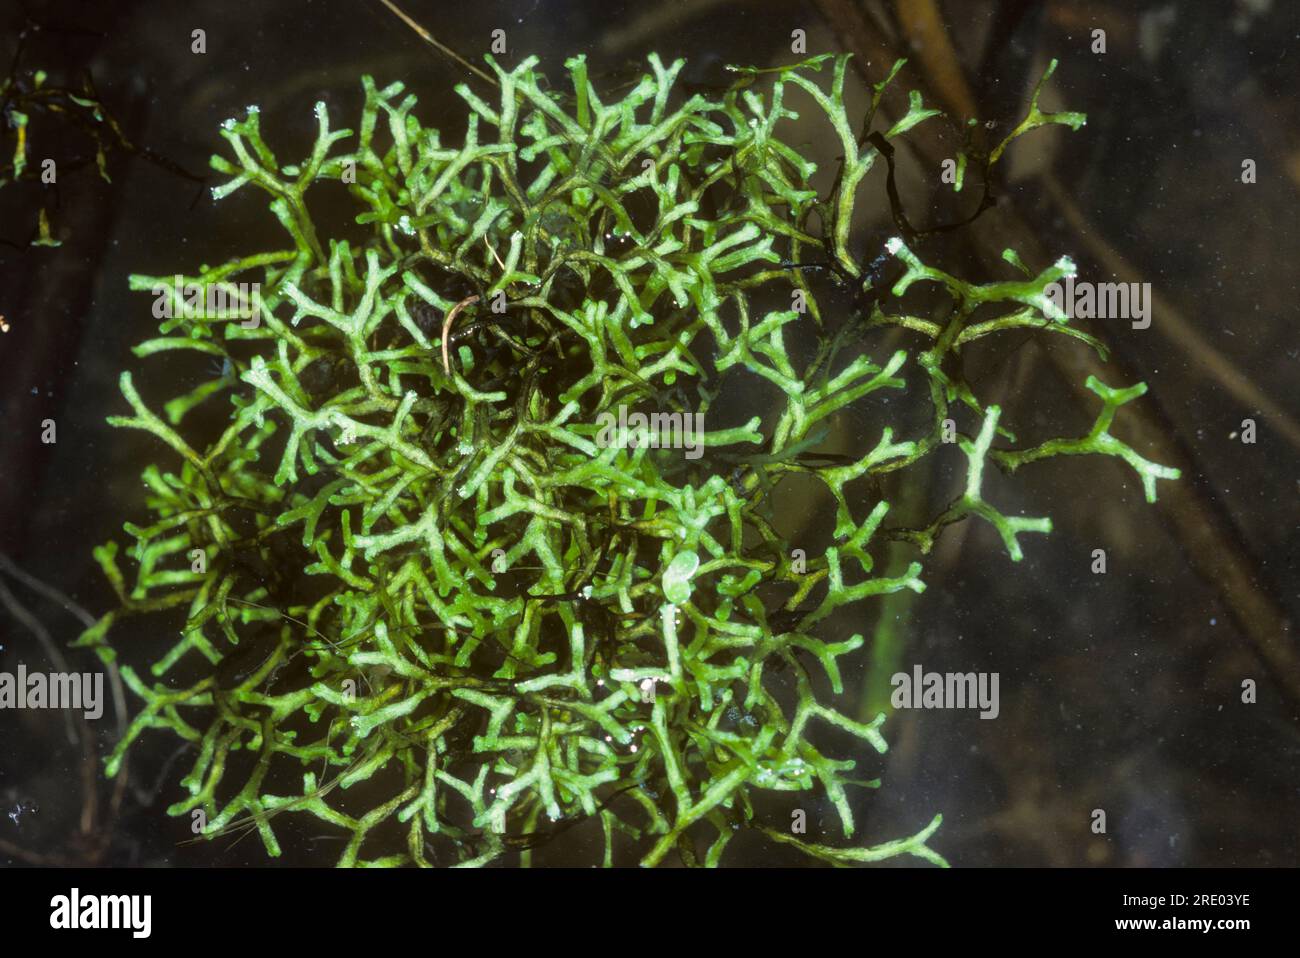 floating crystalwort (Riccia fluitans), in water, Germany Stock Photo